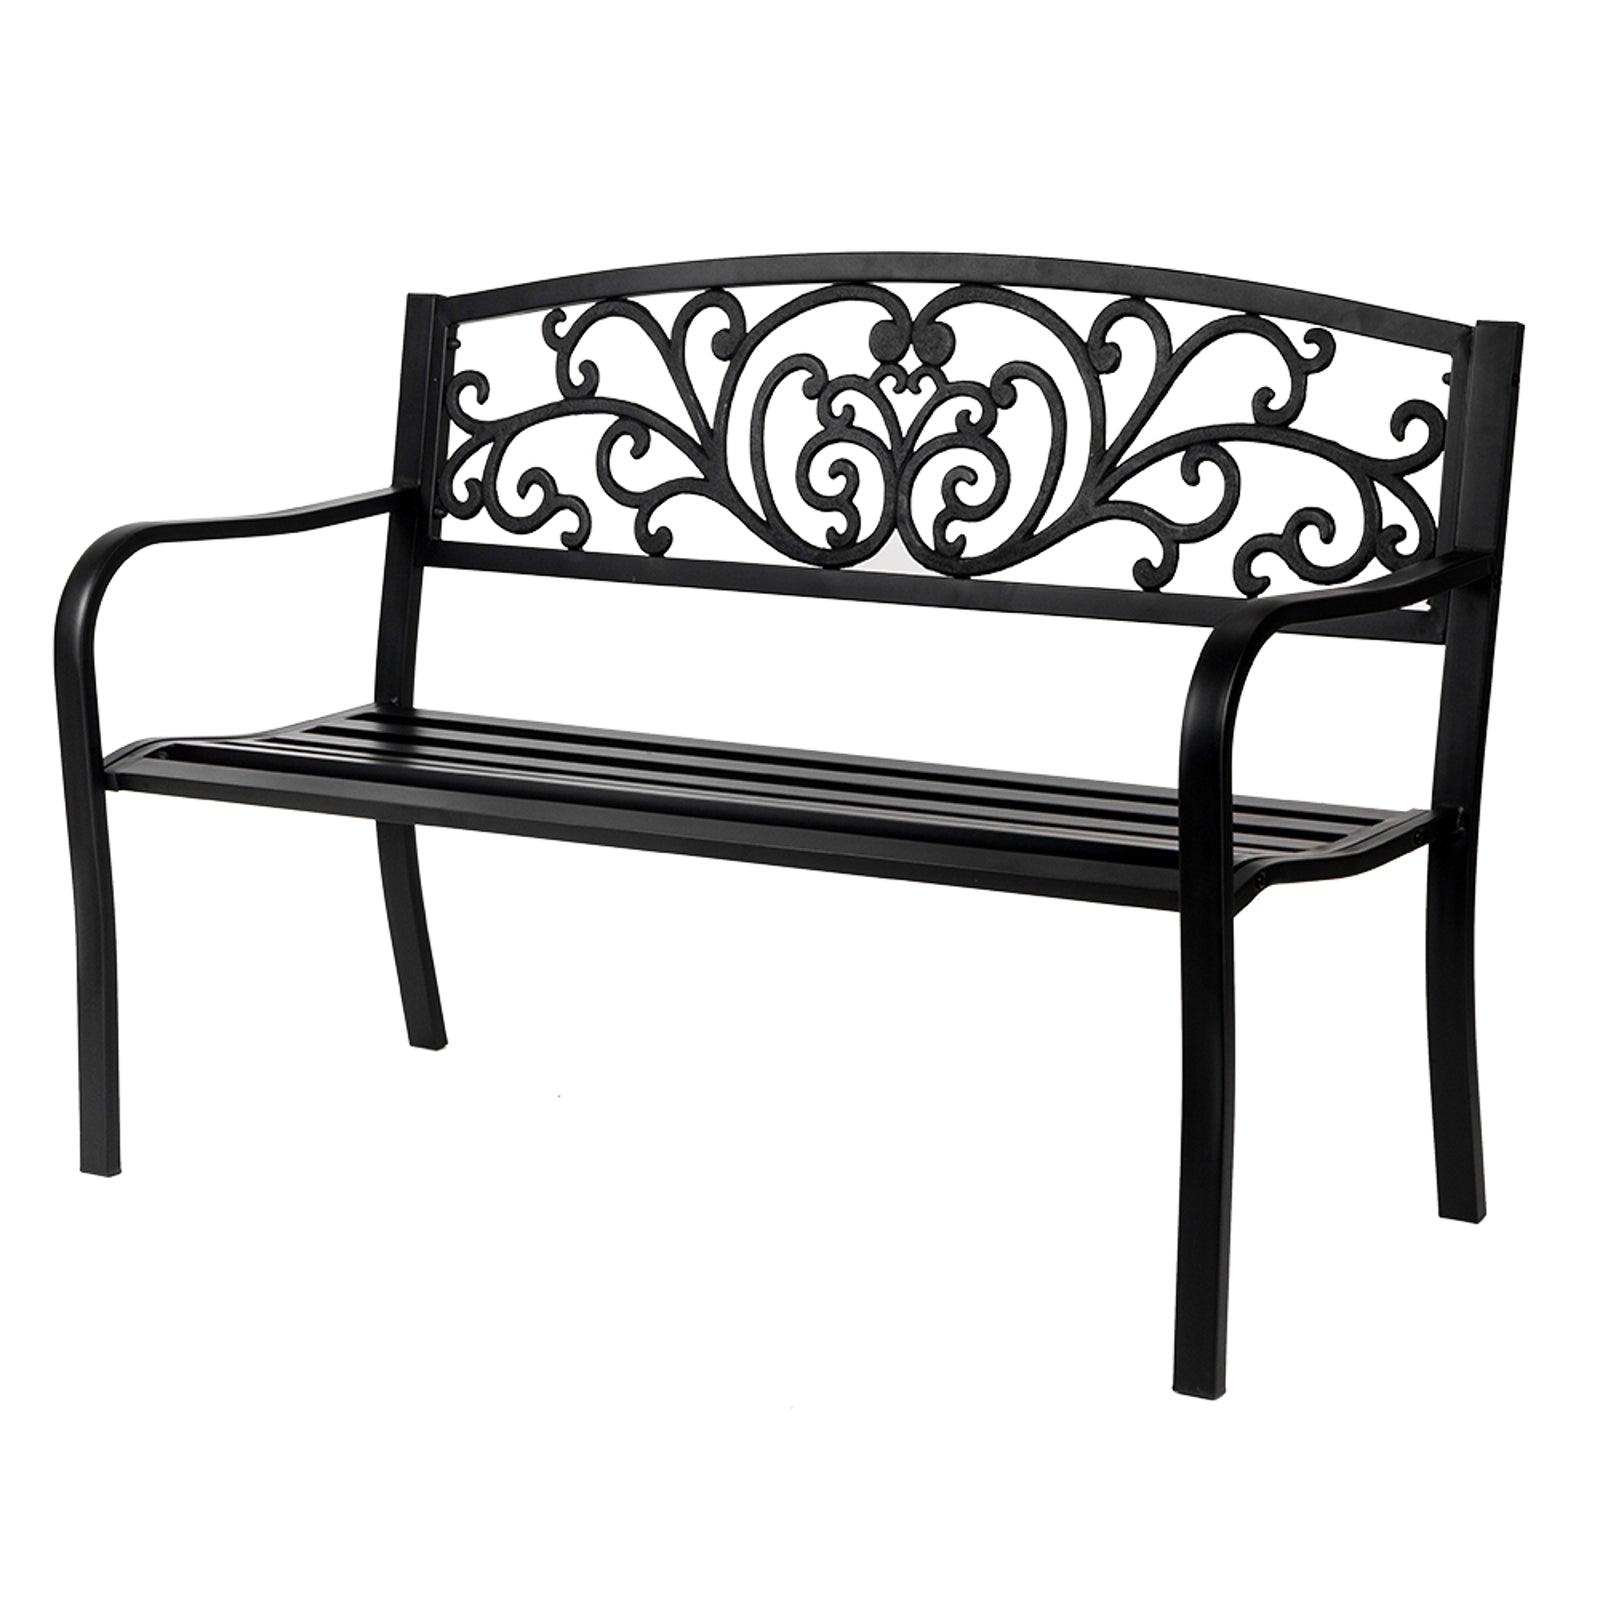 Bench 50" Iron Outdoor Courtyard Decoration Leisure Park - Charming Spaces